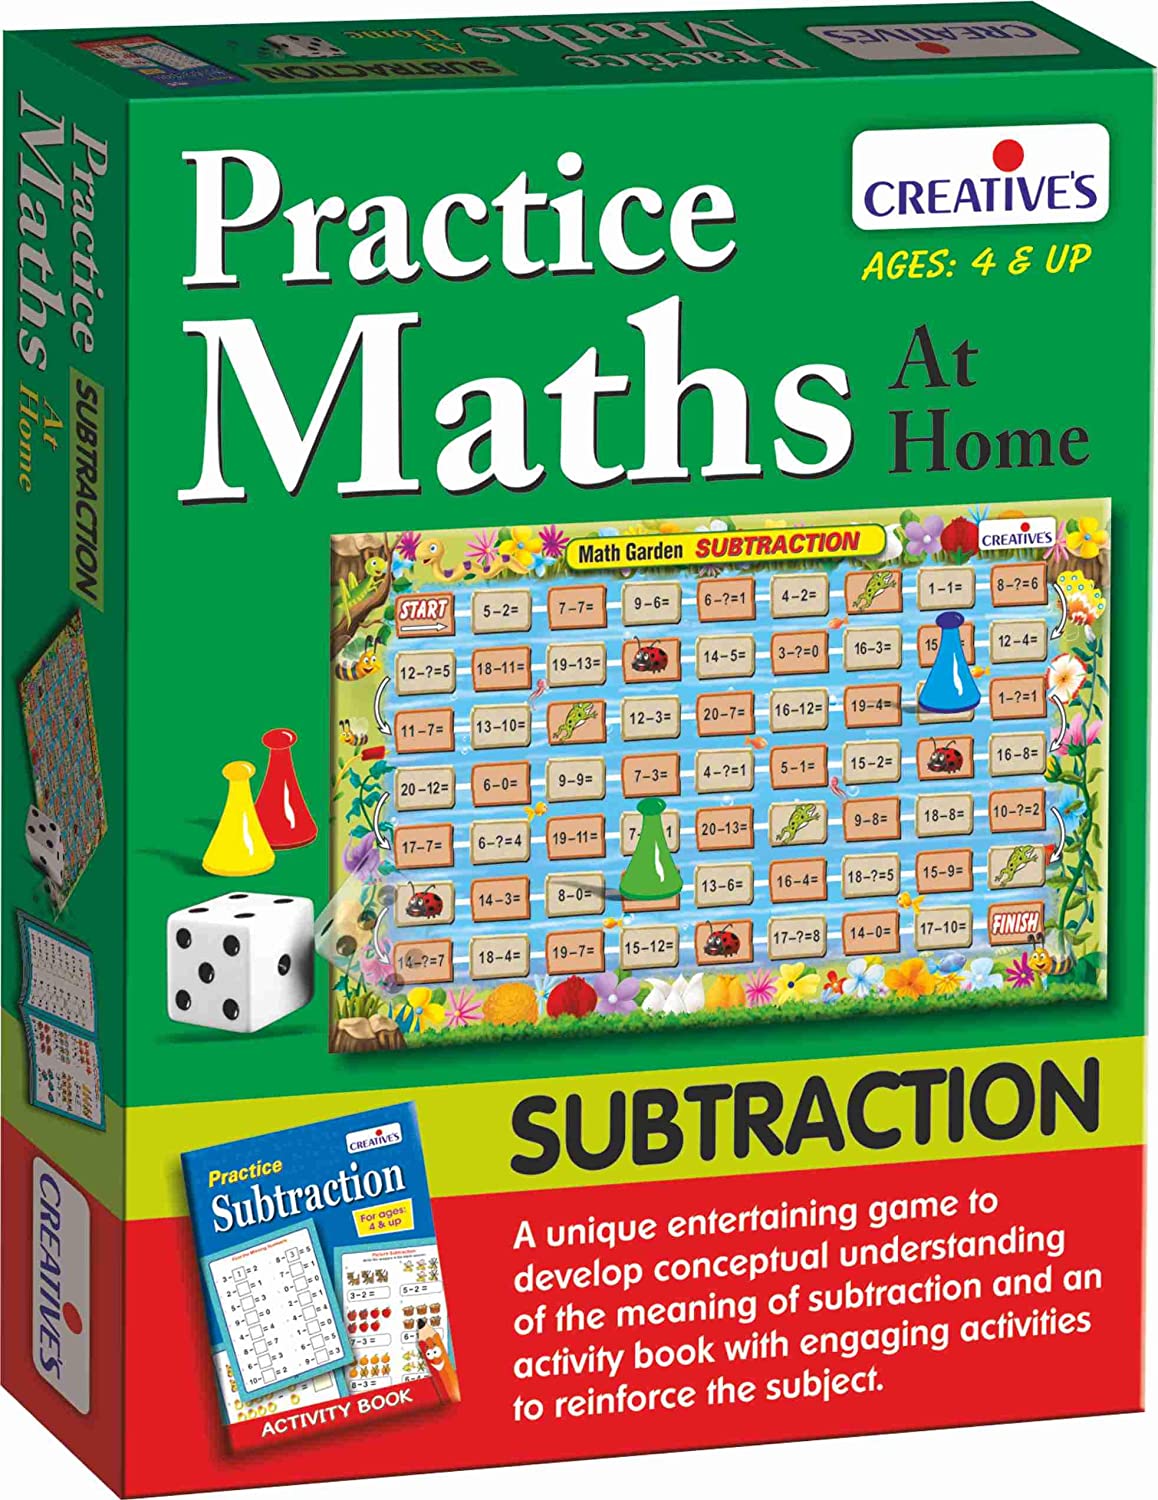 Practice Maths At Home (Subtraction)